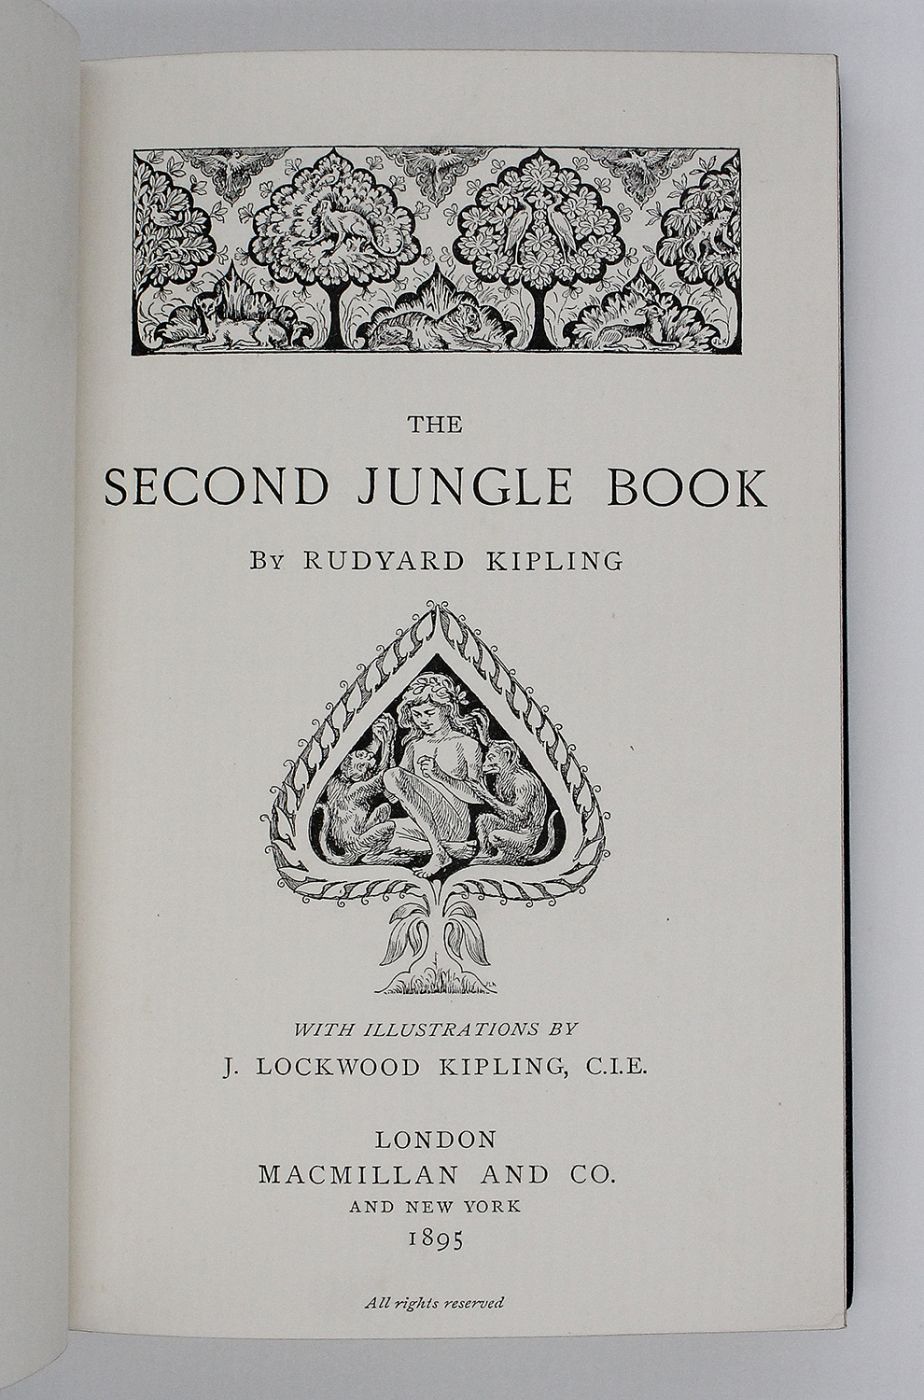 THE JUNGLE BOOK together with THE SECOND JUNGLE BOOK -  image 9